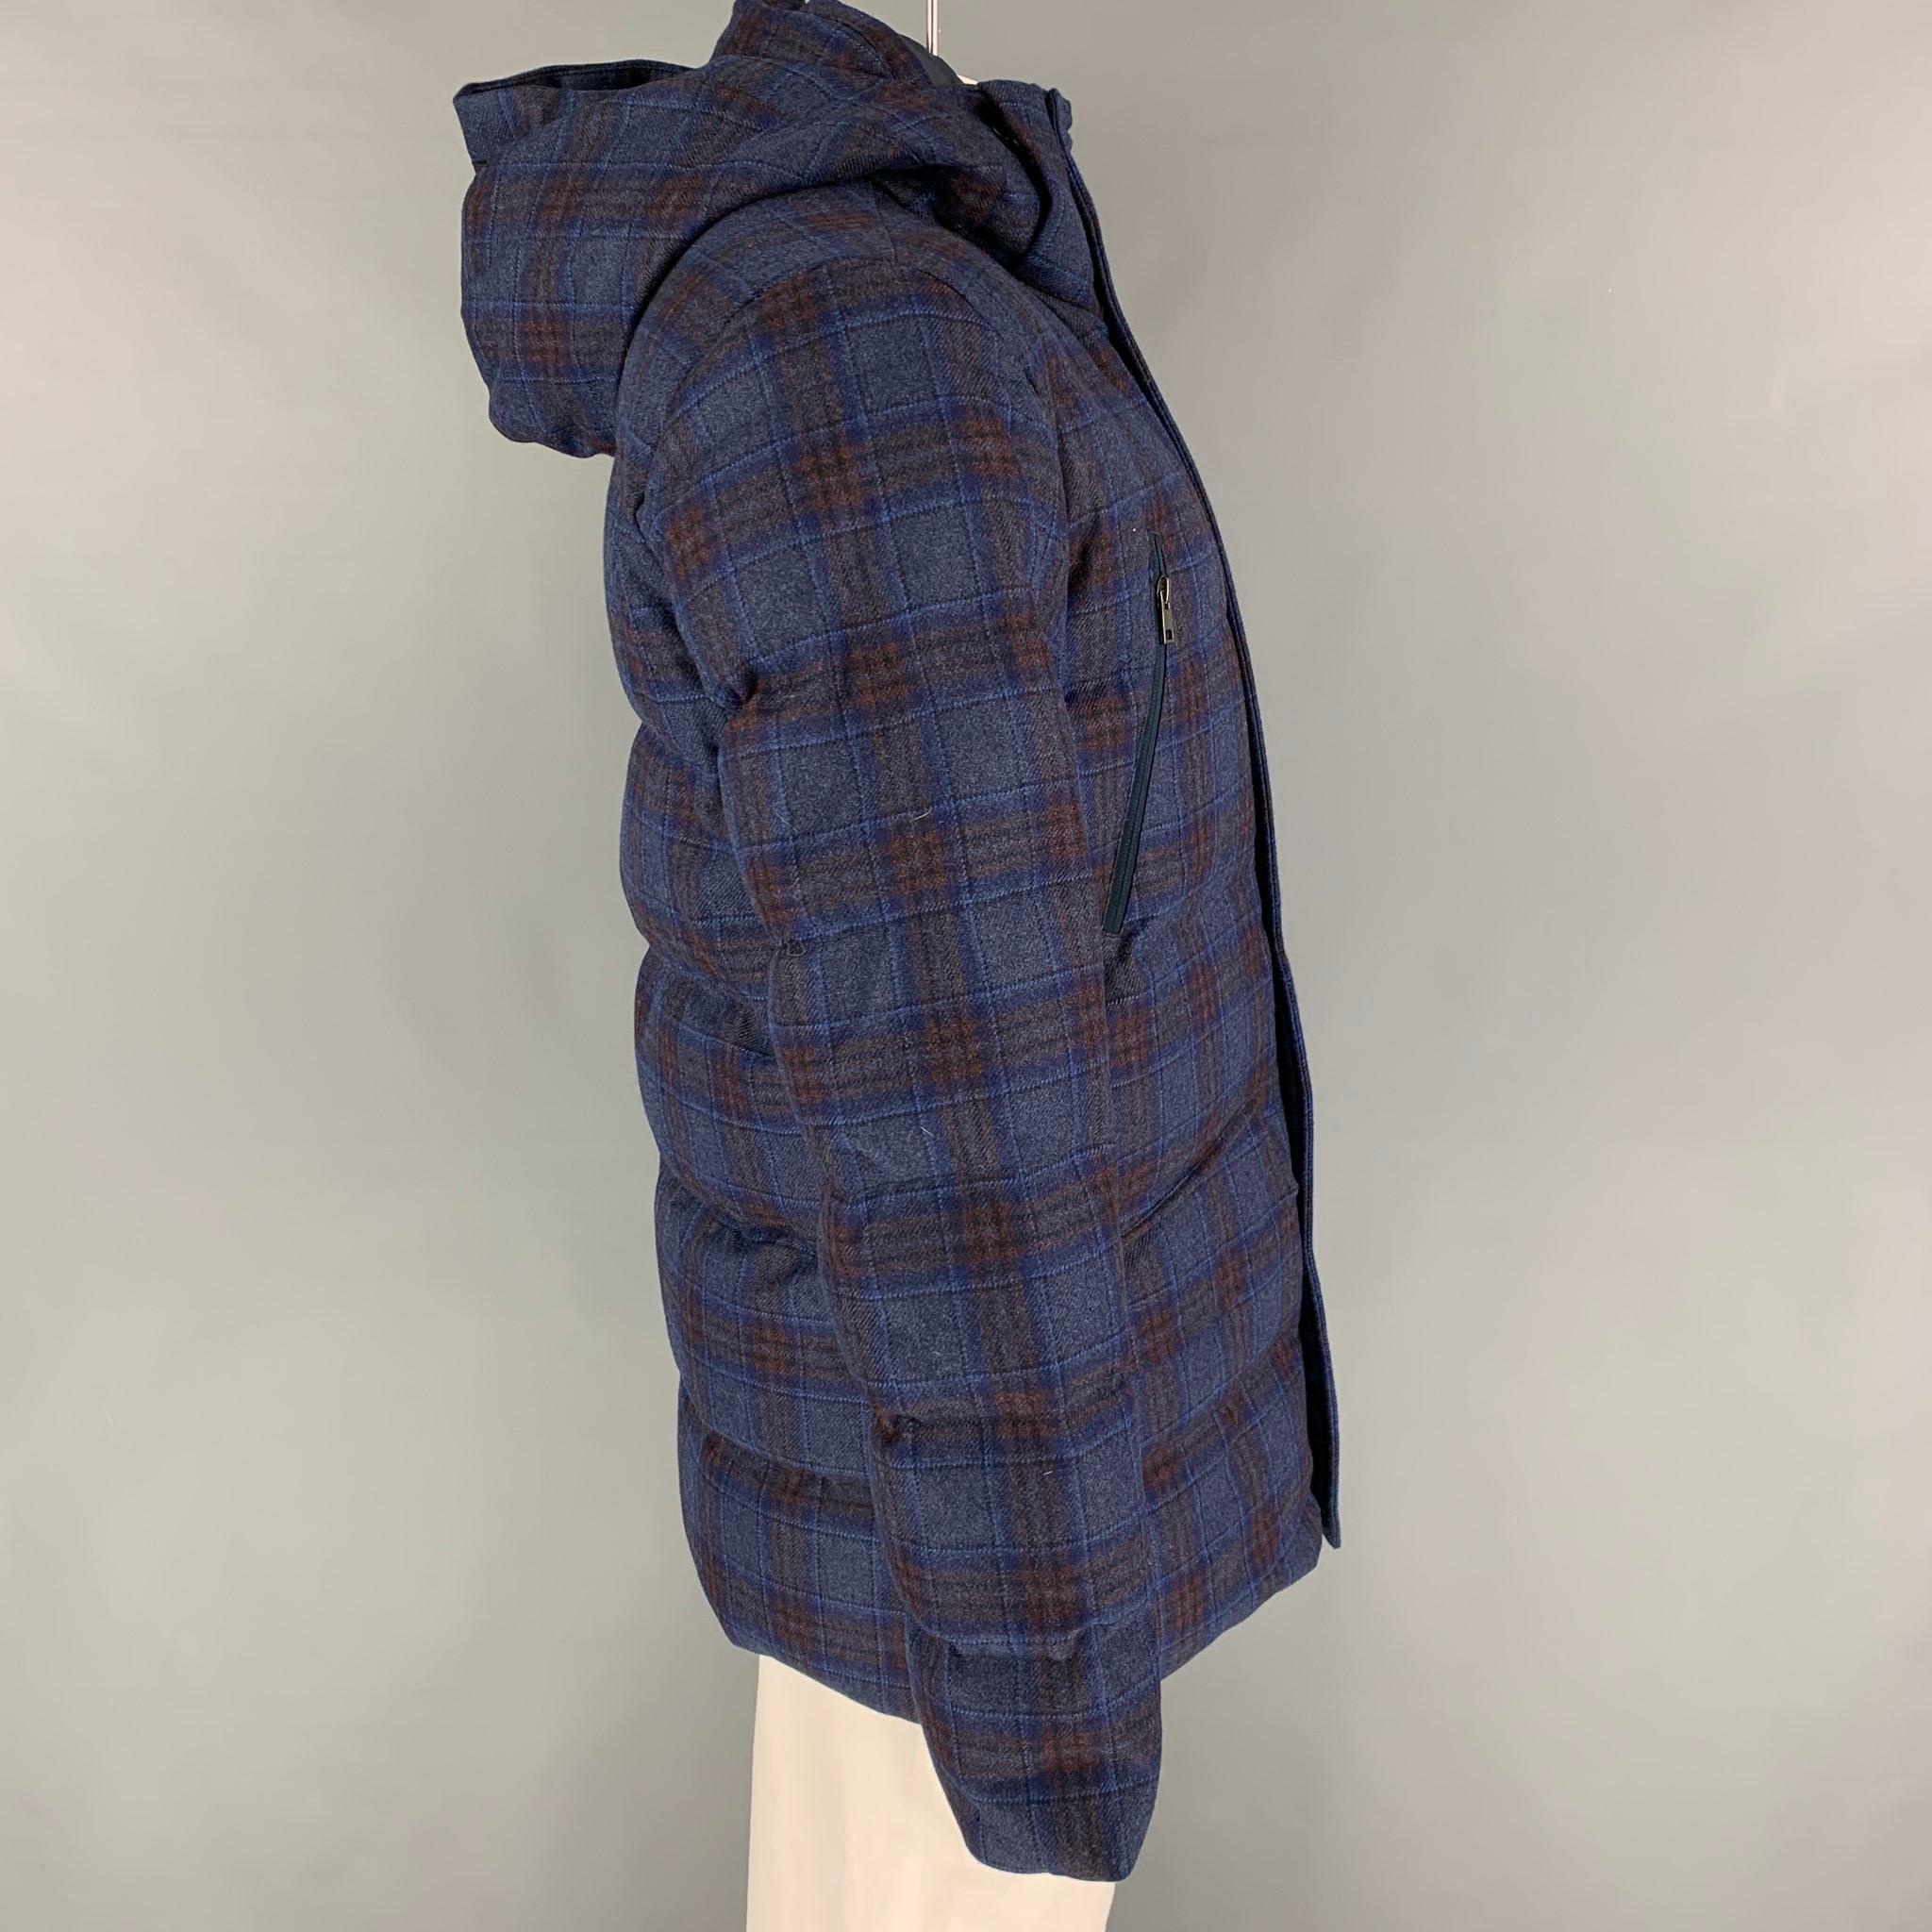 KJUS jacket comes in a navy & gray plaid quilted wool / cashmere fabric by Loro Piana featuring a hooded style, front pockets, sleeve logo detail, and a hidden zip & snap button closure. 

New With Tags. 
Marked: 52
Original Retail Price: